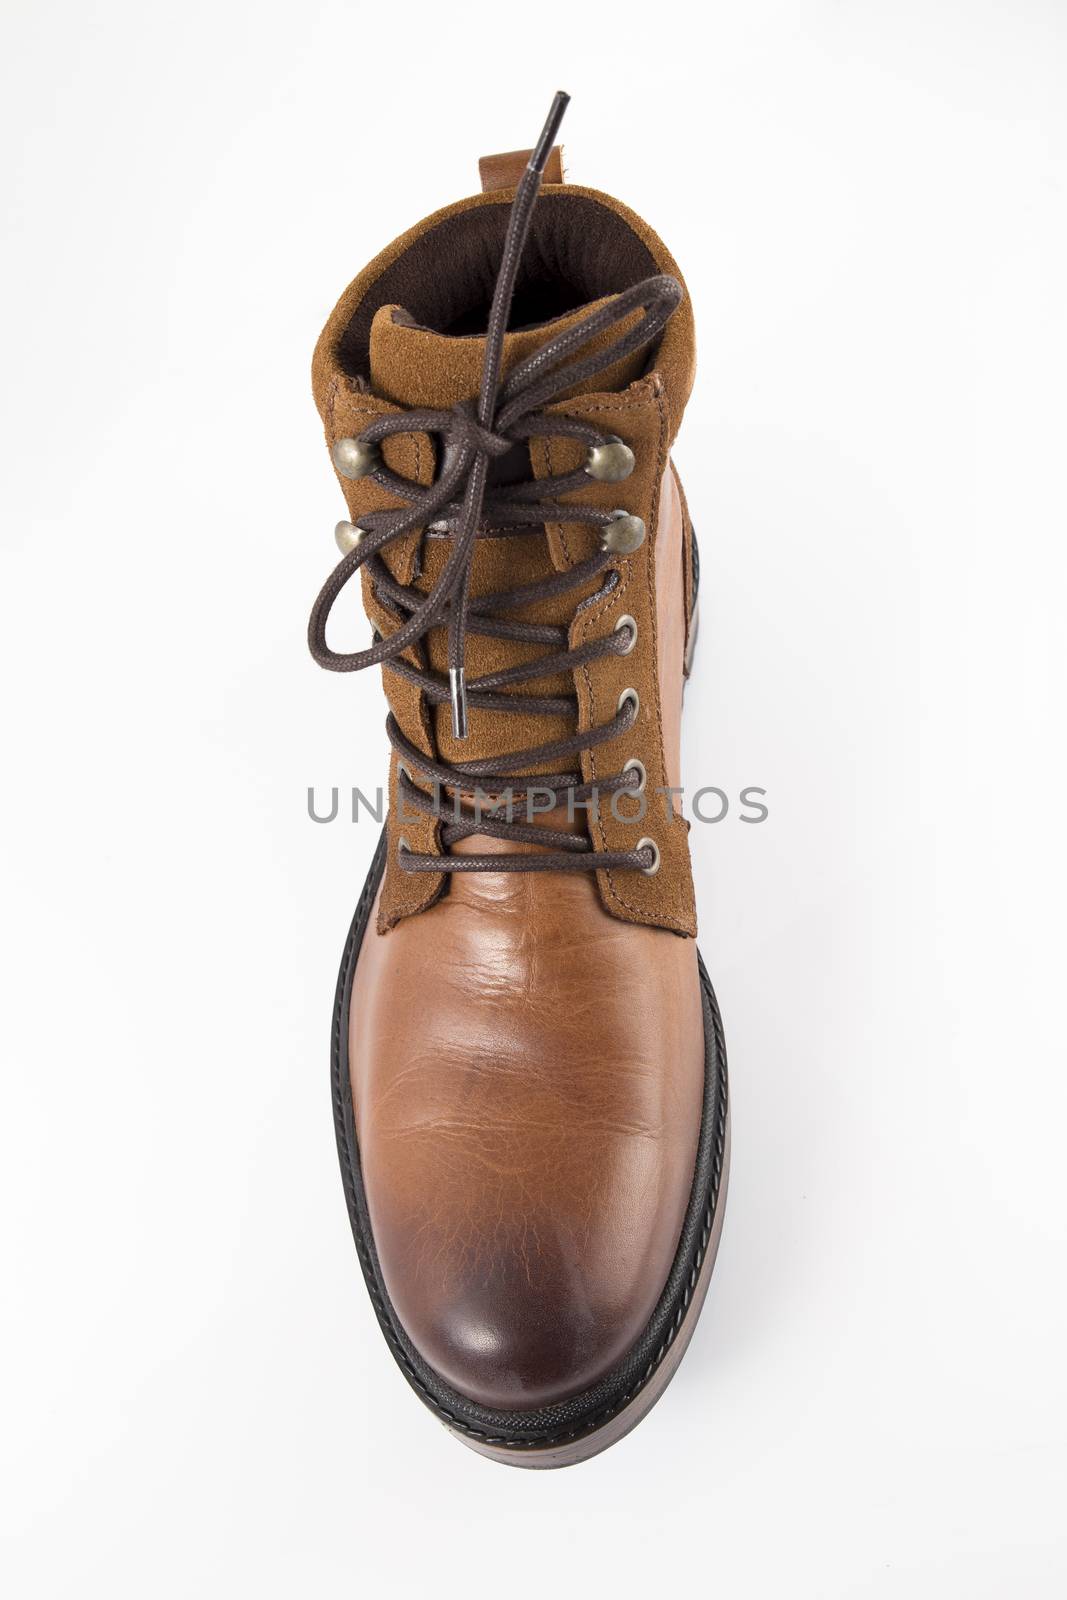 Brown leather boots on white background, isolated product, top view. by GeorgeVieiraSilva